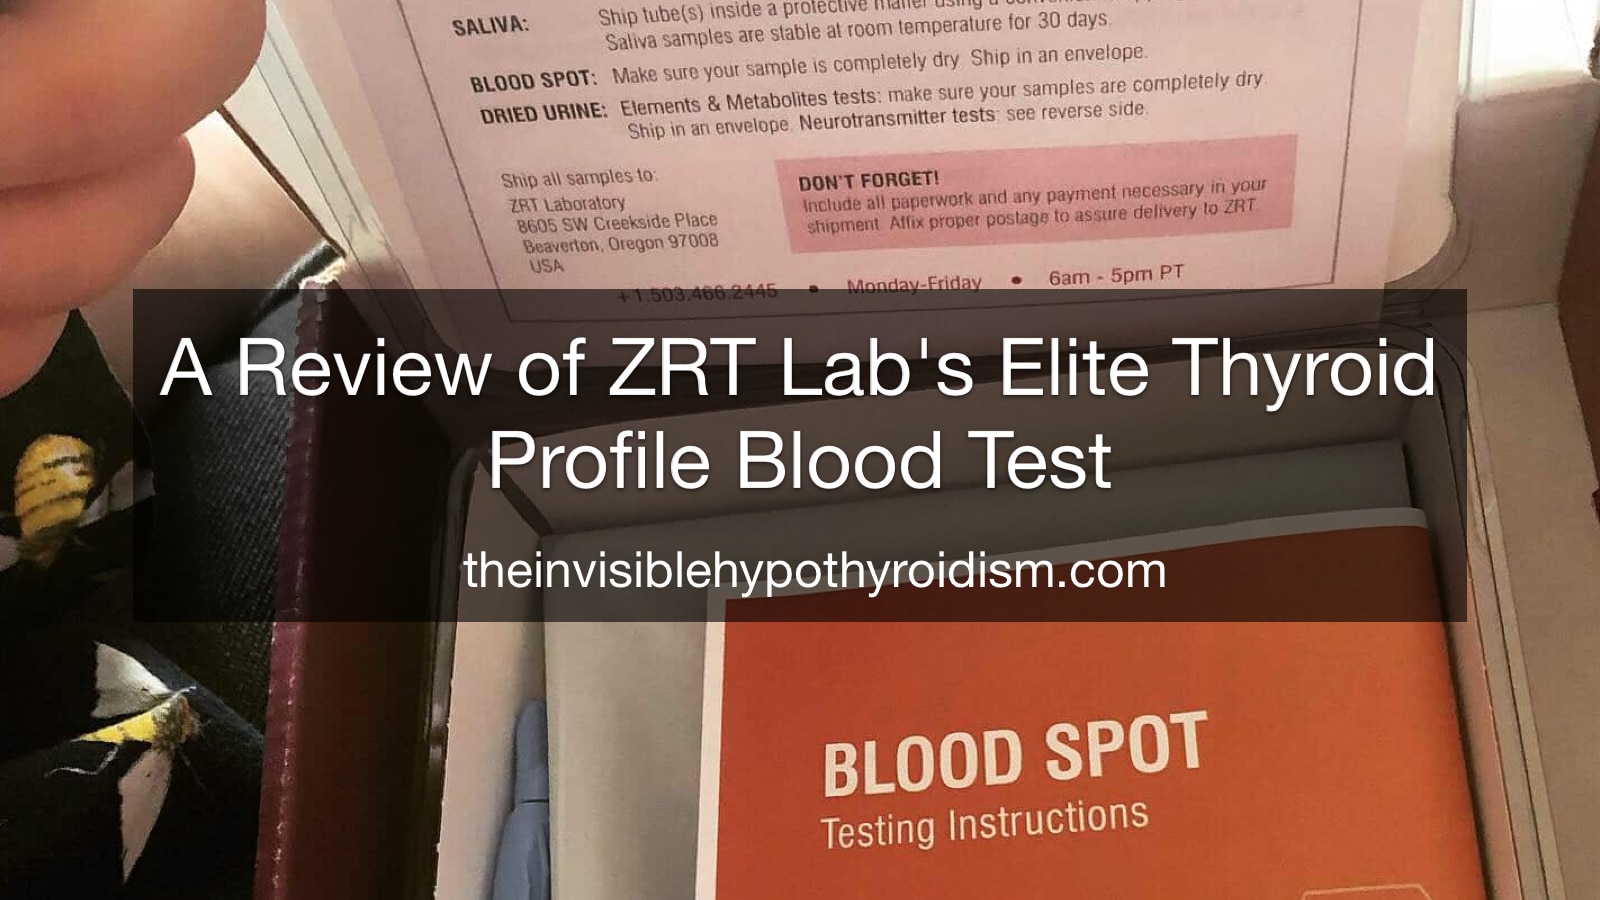 A Review of ZRT Lab's Elite Thyroid Profile Blood Test